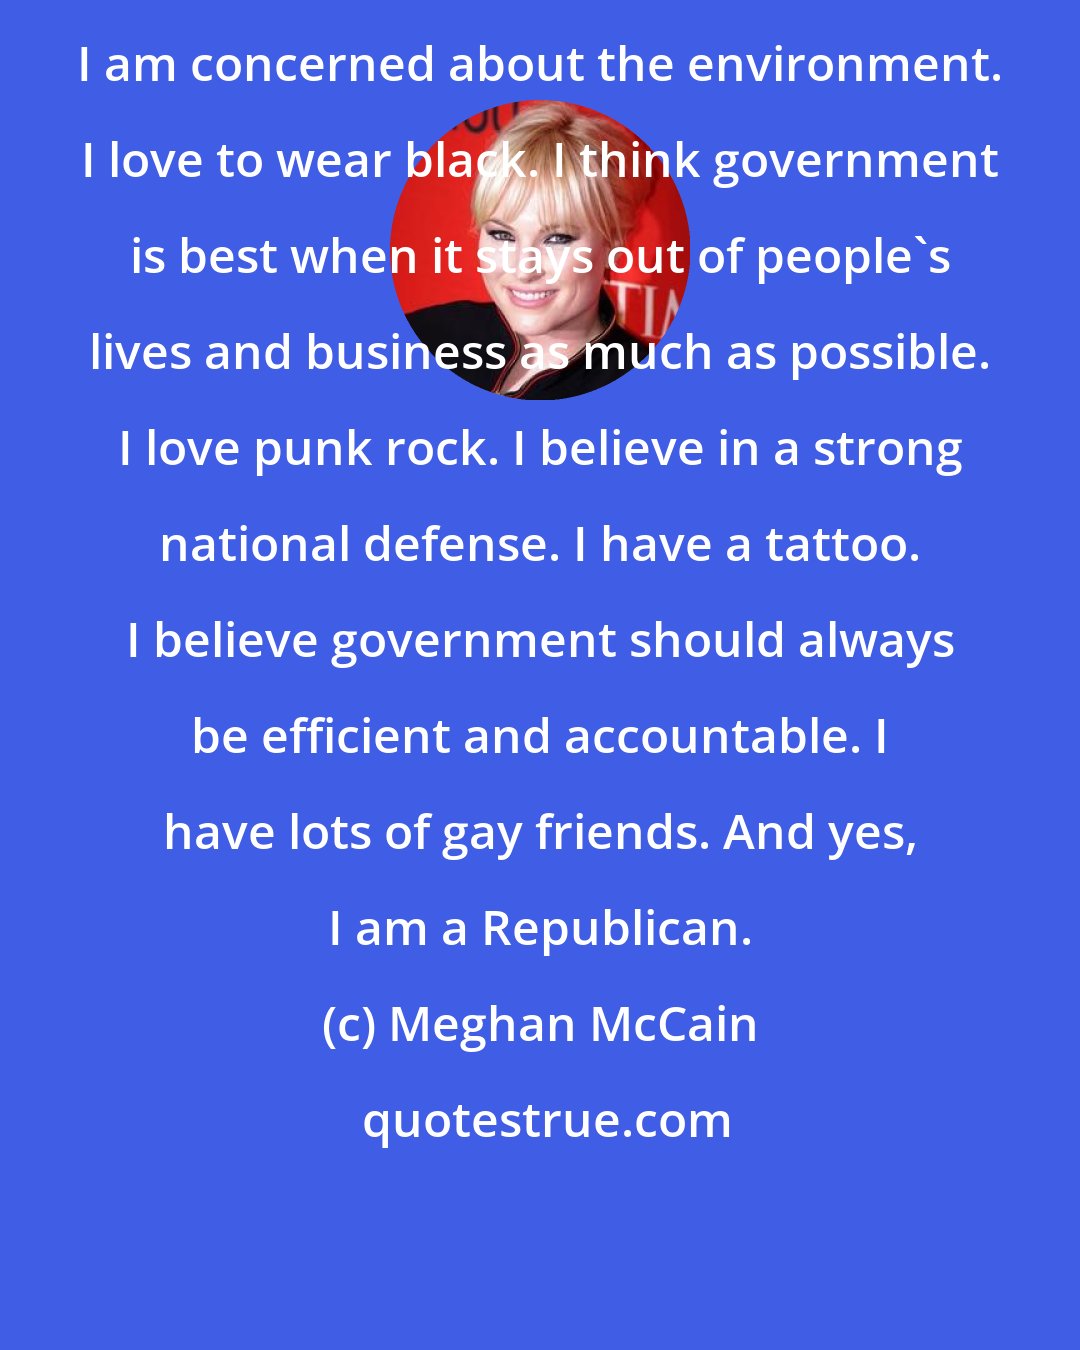 Meghan McCain: I am concerned about the environment. I love to wear black. I think government is best when it stays out of people's lives and business as much as possible. I love punk rock. I believe in a strong national defense. I have a tattoo. I believe government should always be efficient and accountable. I have lots of gay friends. And yes, I am a Republican.